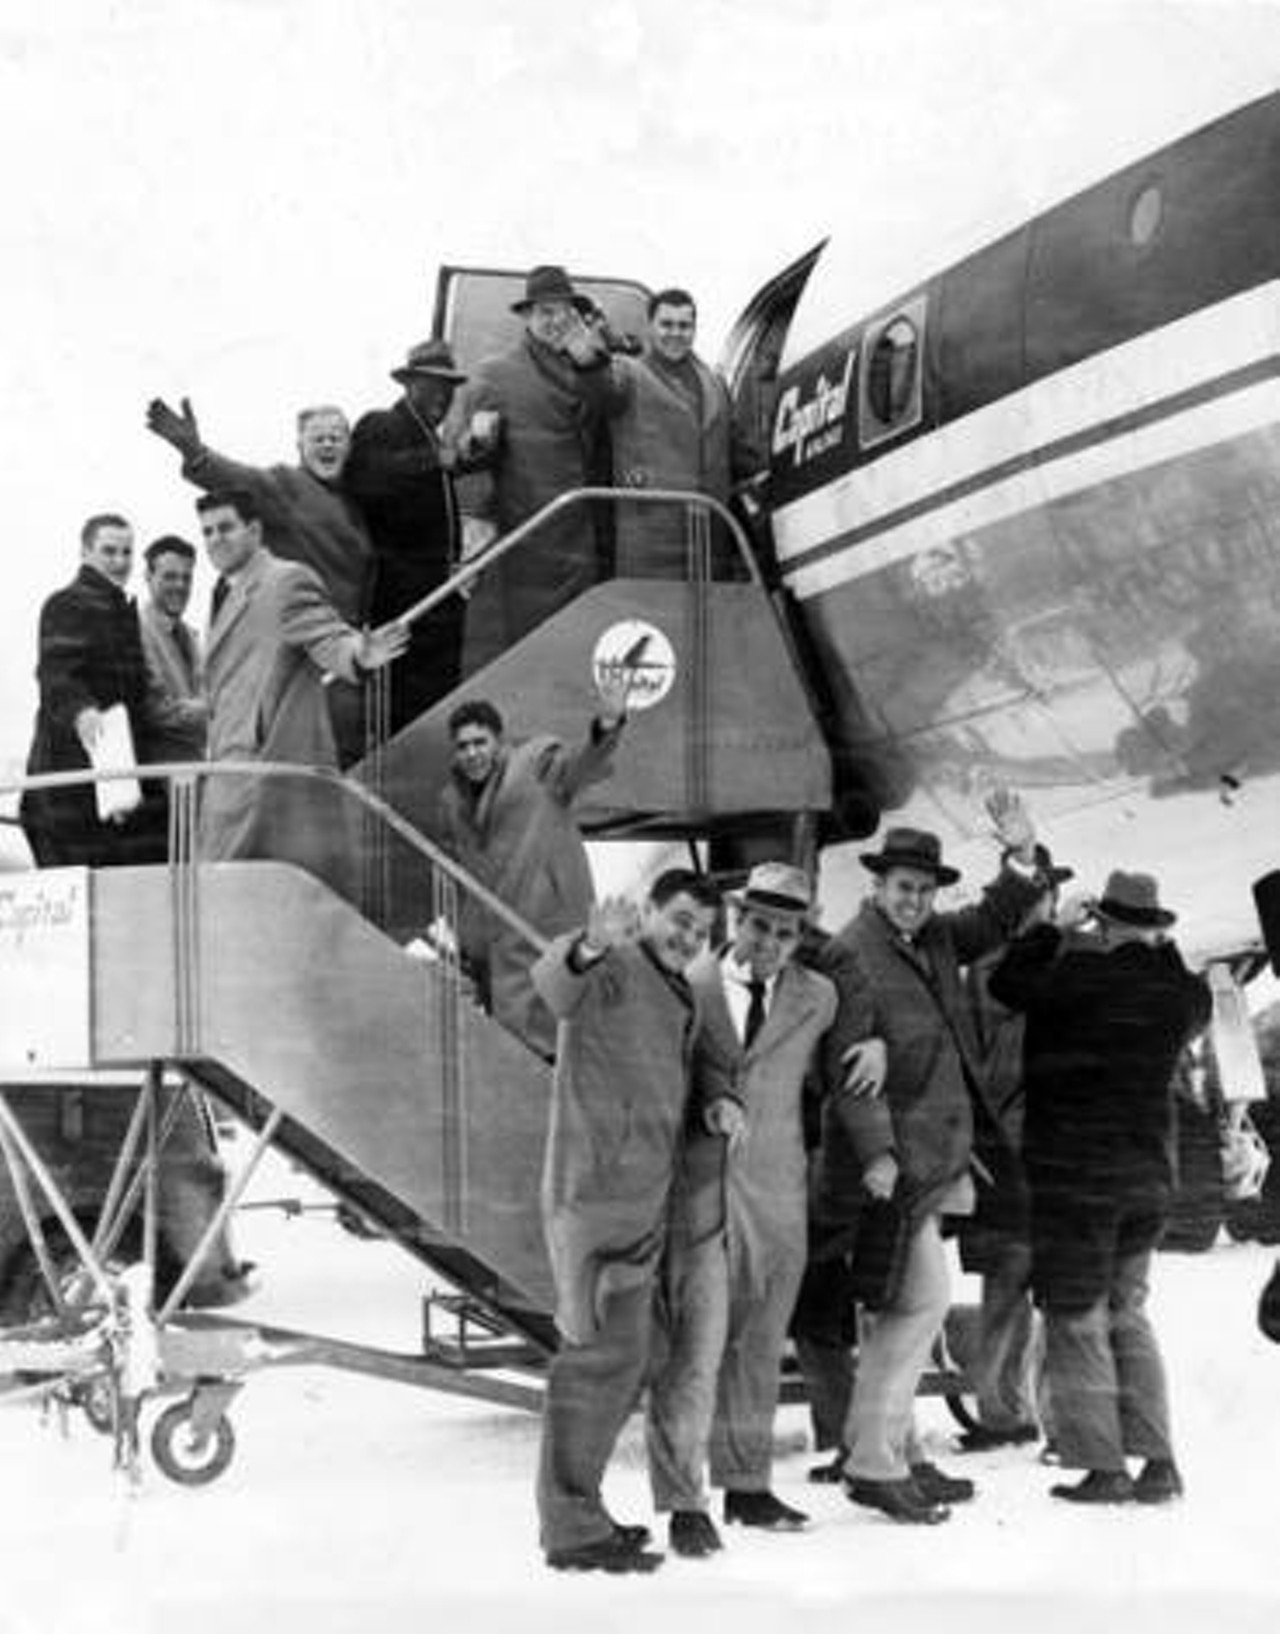 The Cleveland Browns depart from Cleveland and head to Los Angeles to play the Rams in the 1951 NFL Championship game.